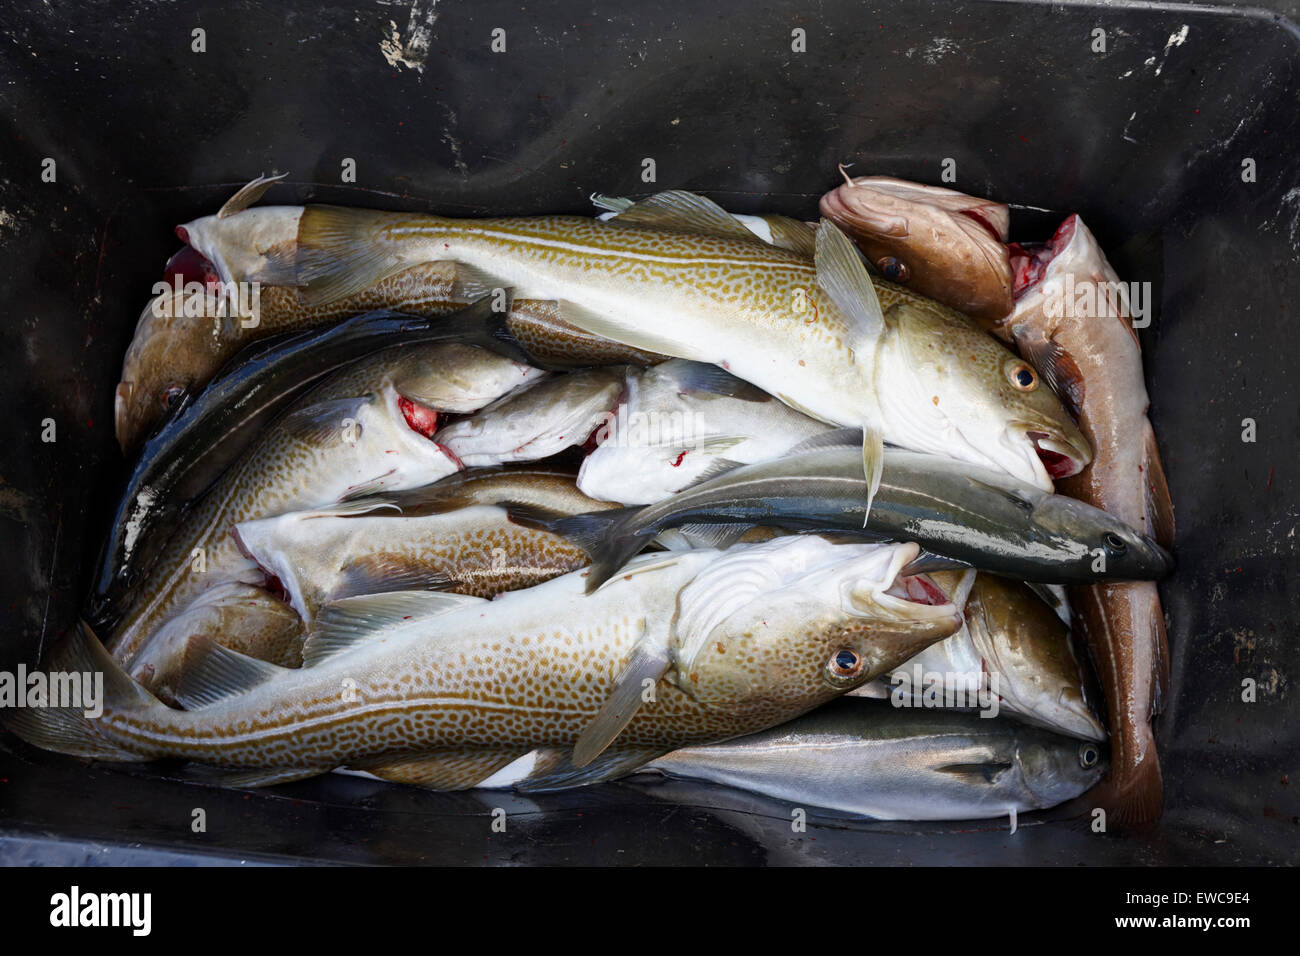 cod pollock and other sea fish caught on a fishing trip Reykjavik iceland Stock Photo